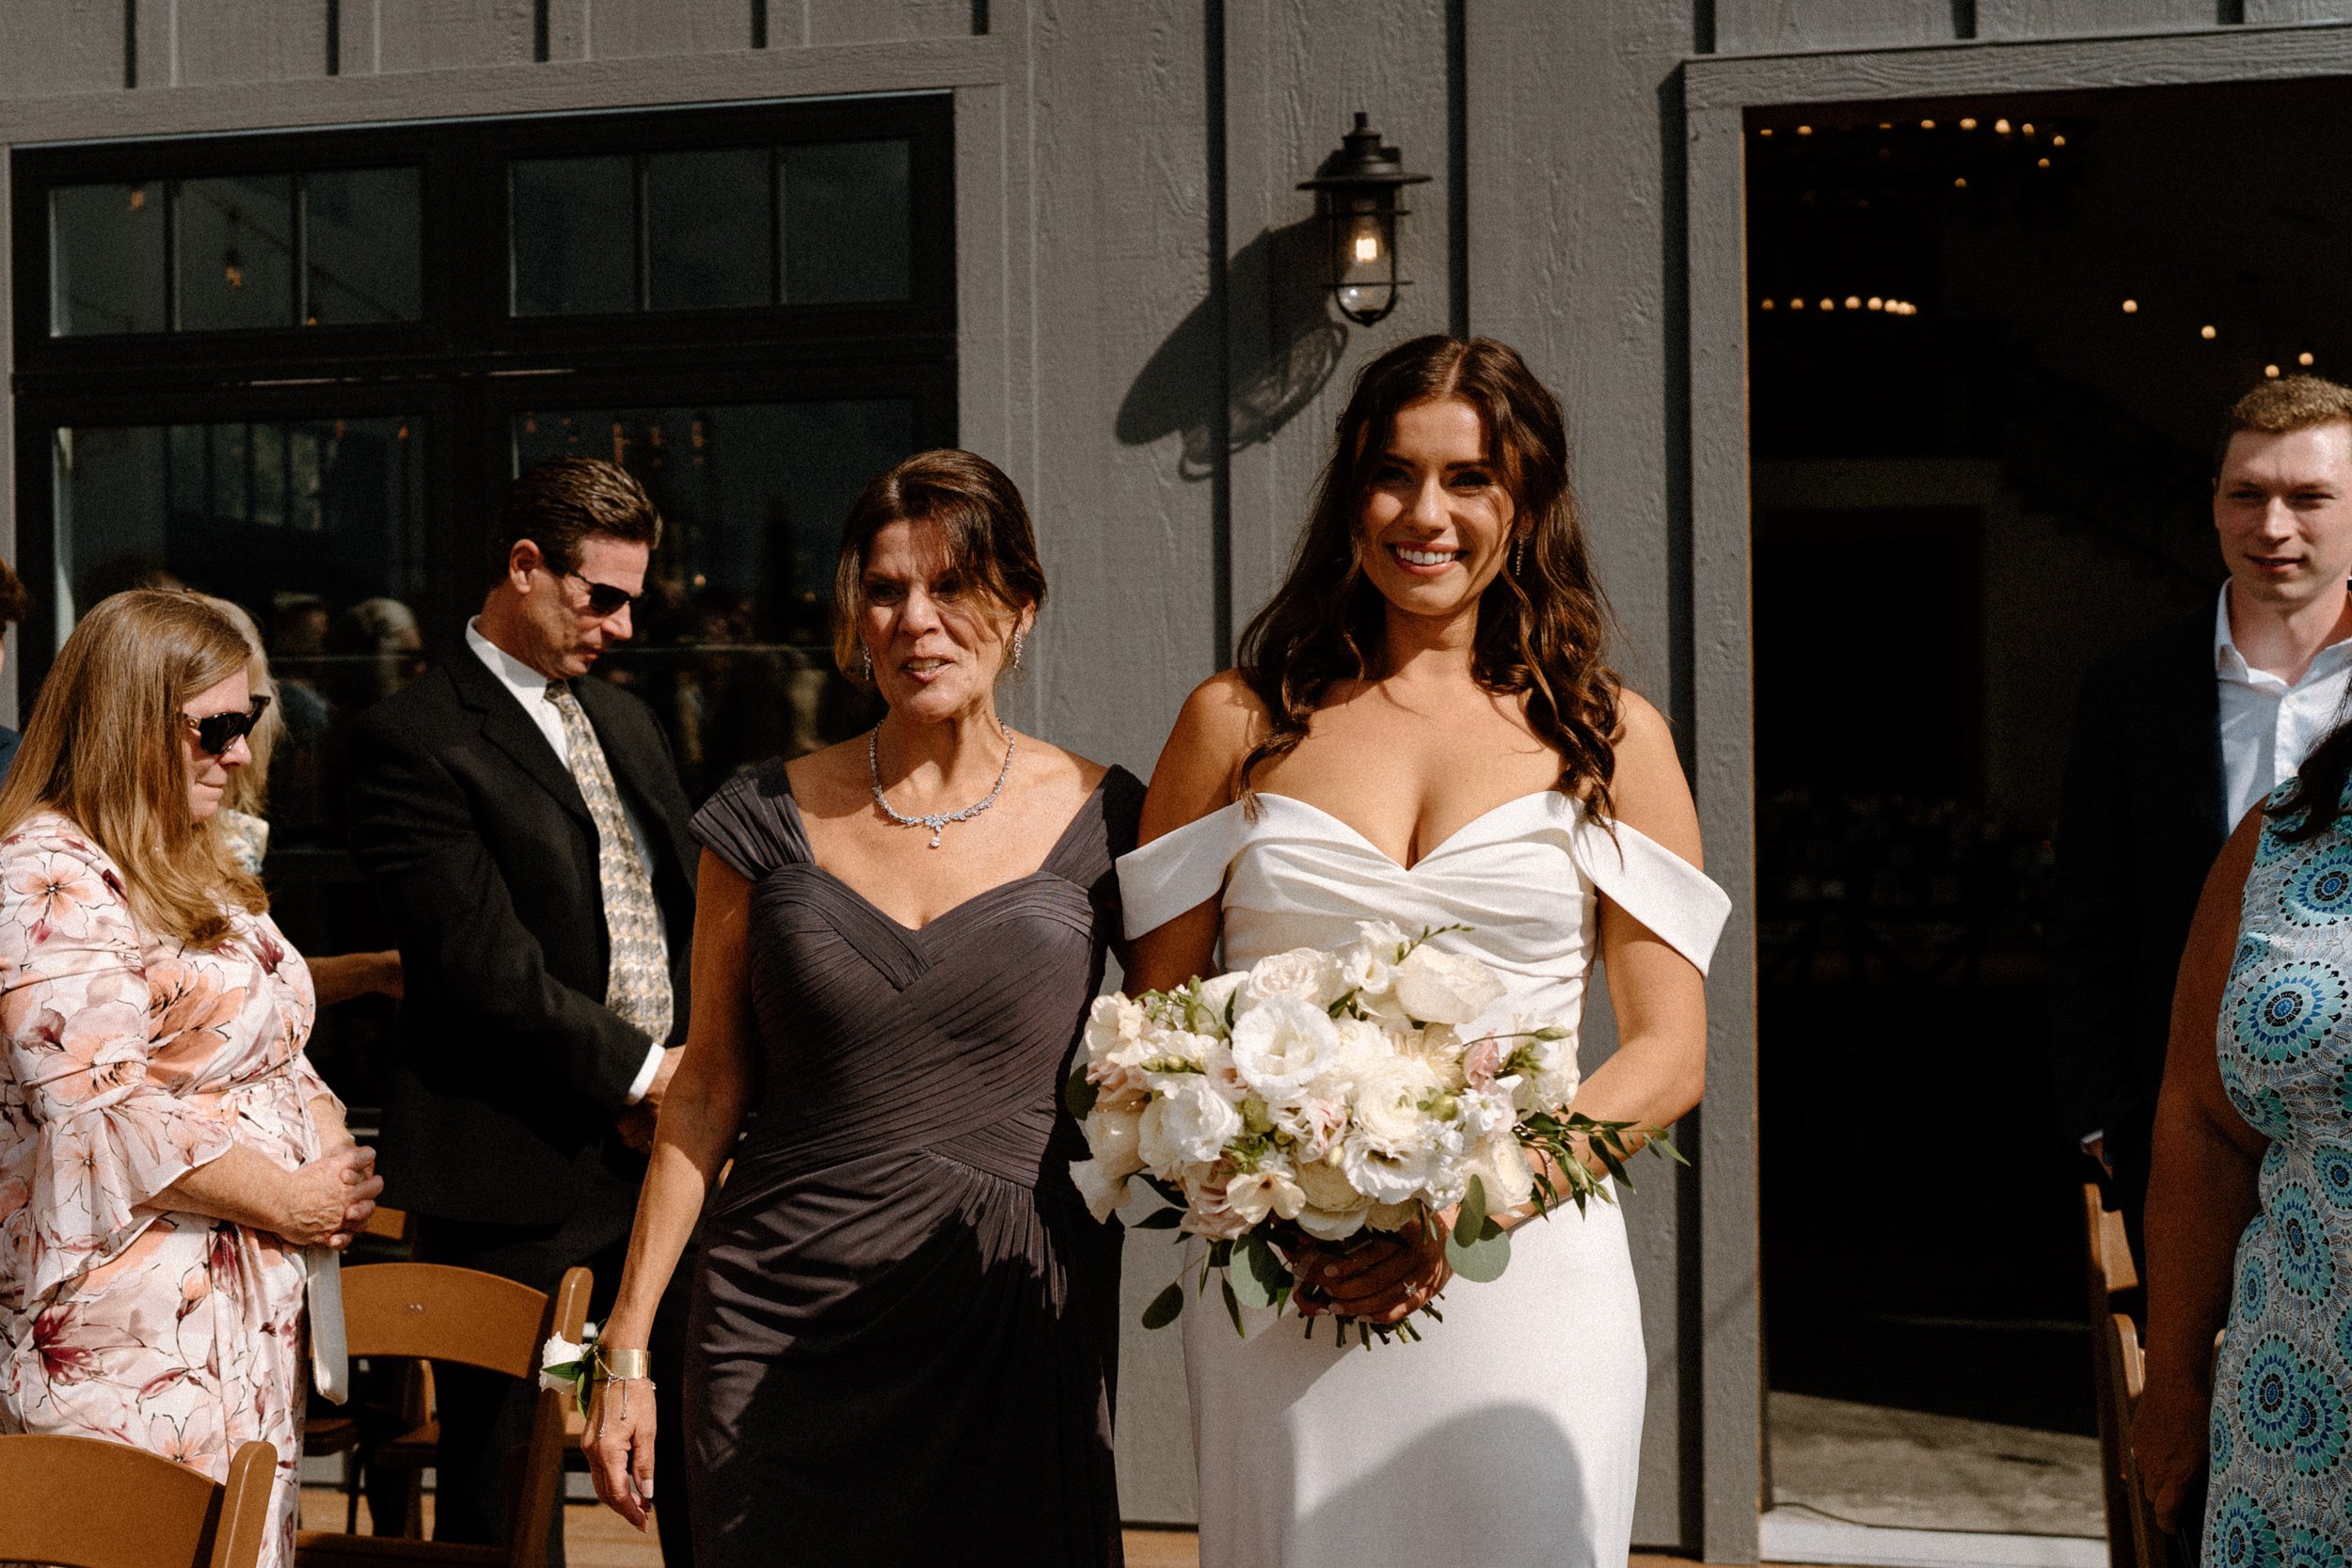 The bride and her mother walk down the aisle together at North Star Gatherings in Idaho Springs, CO